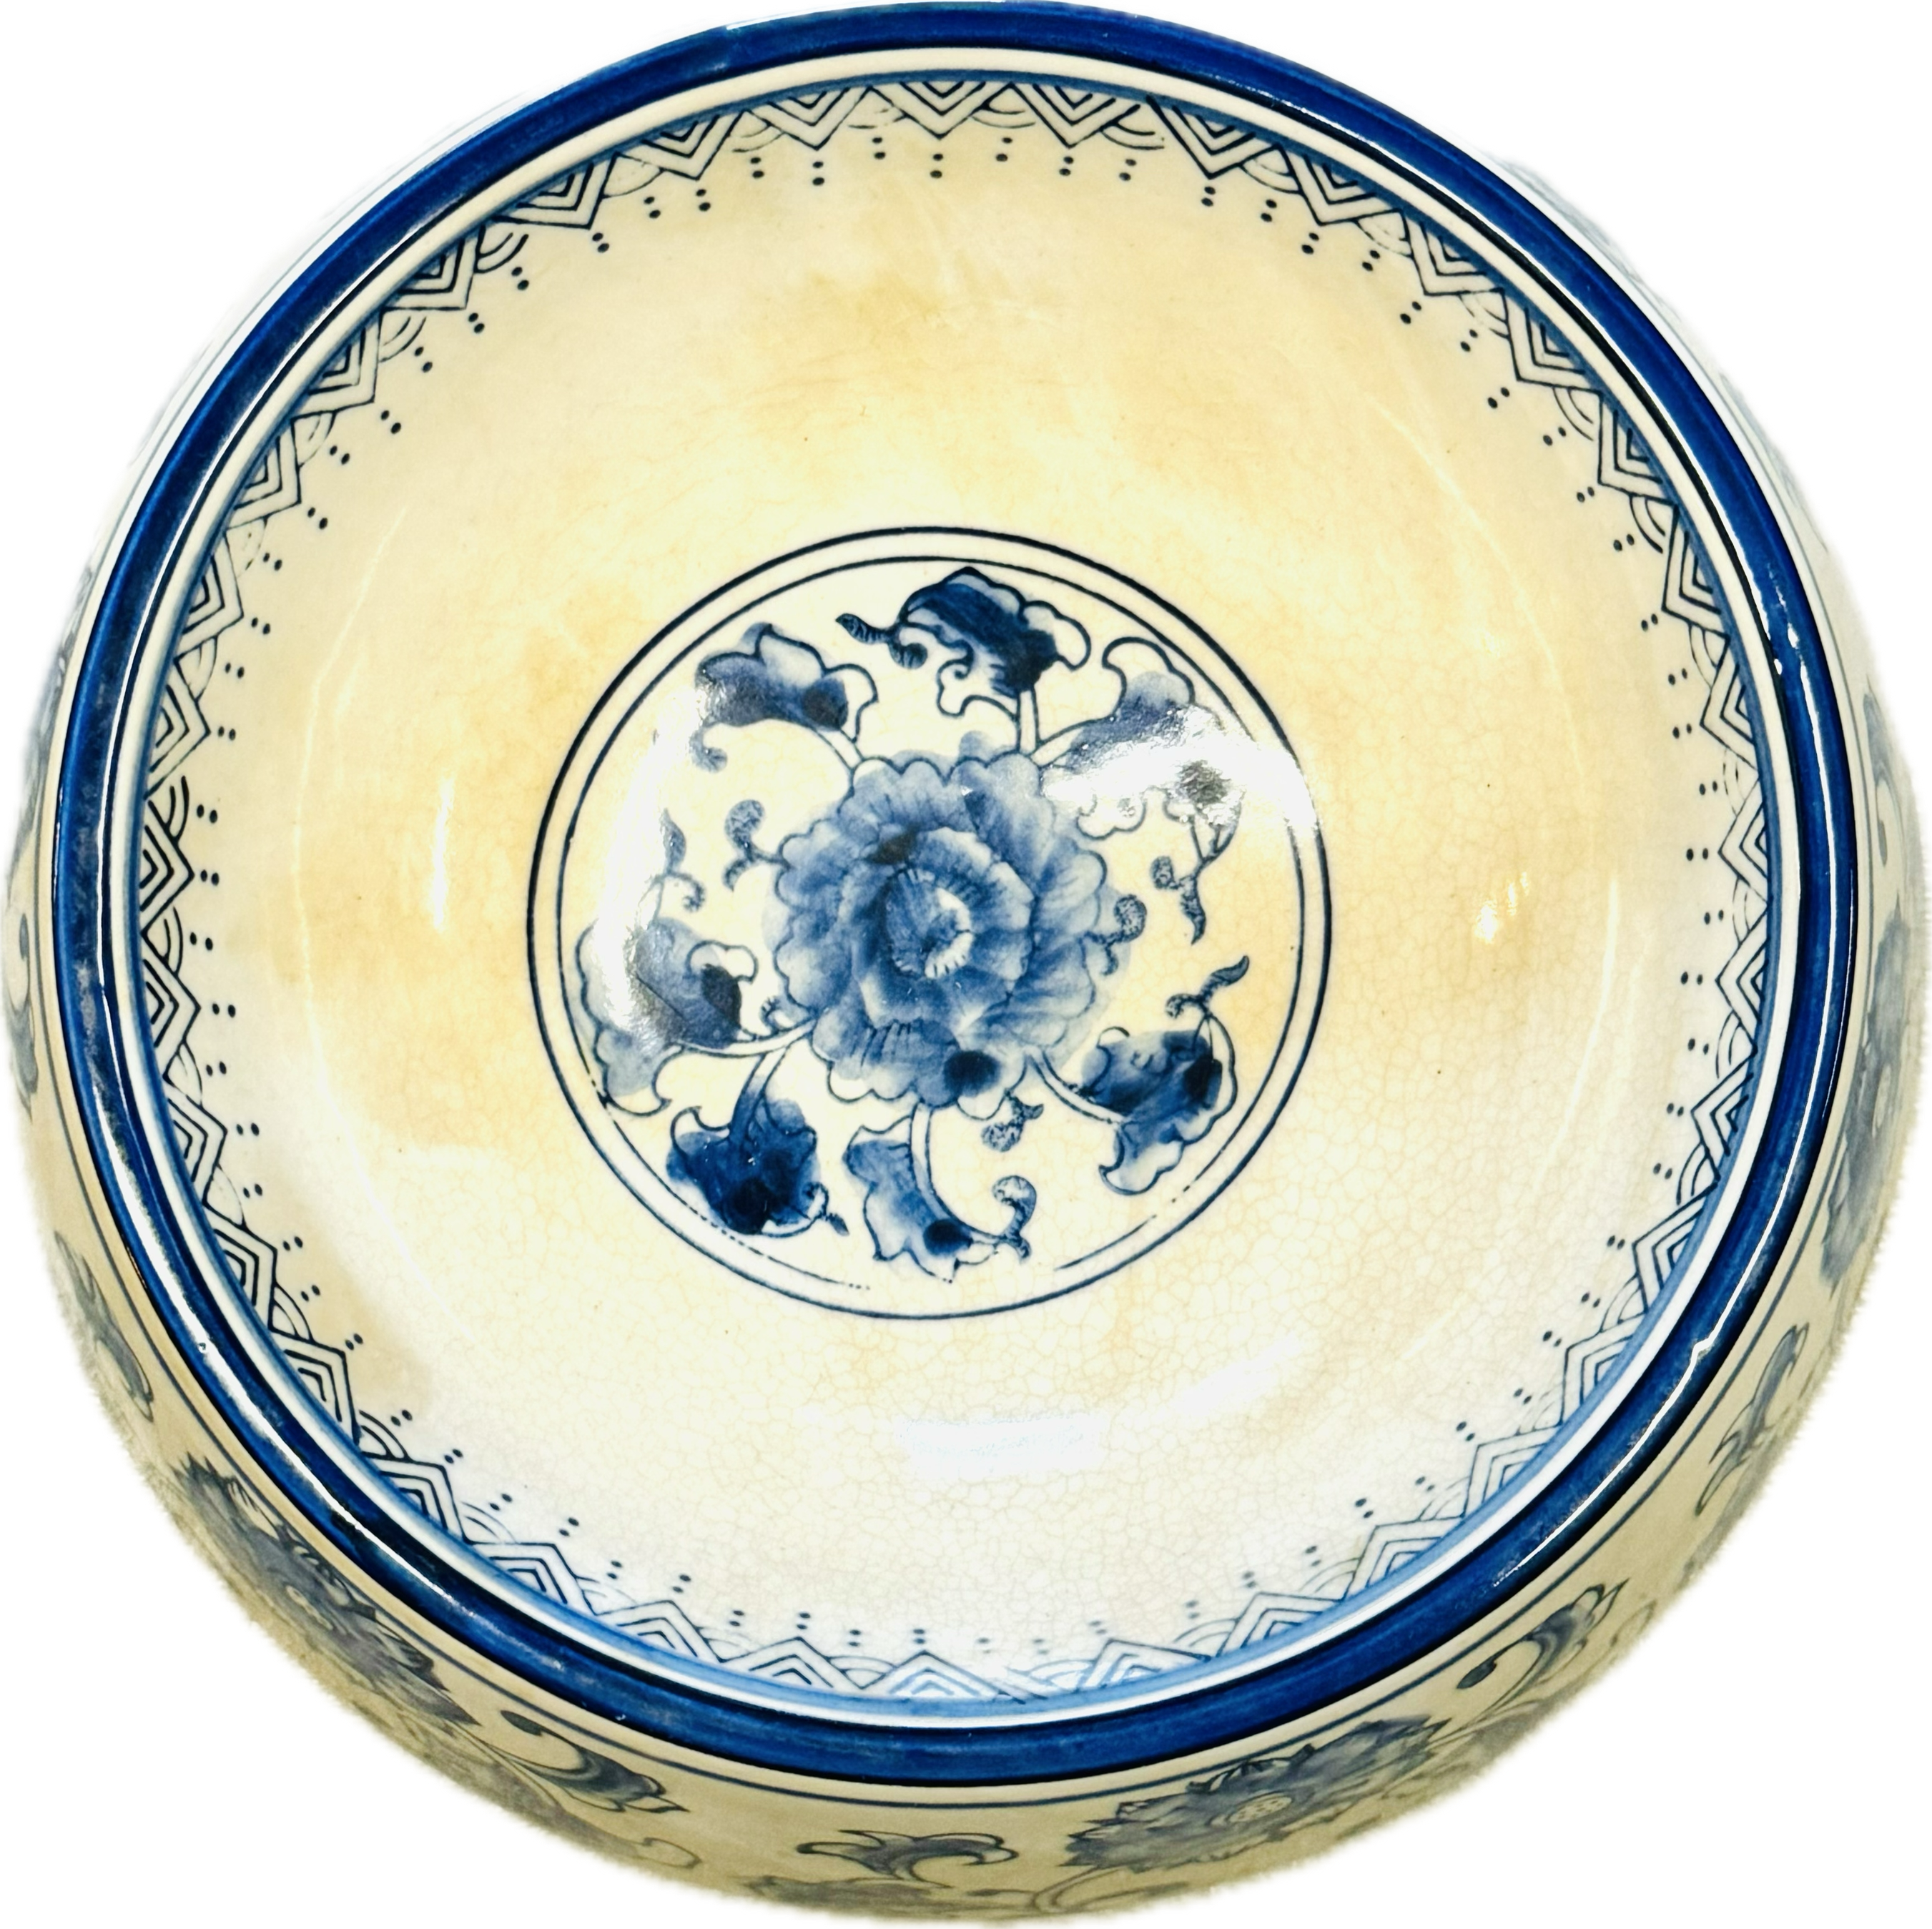 Non-Tip Dog Bowl - Blue and White